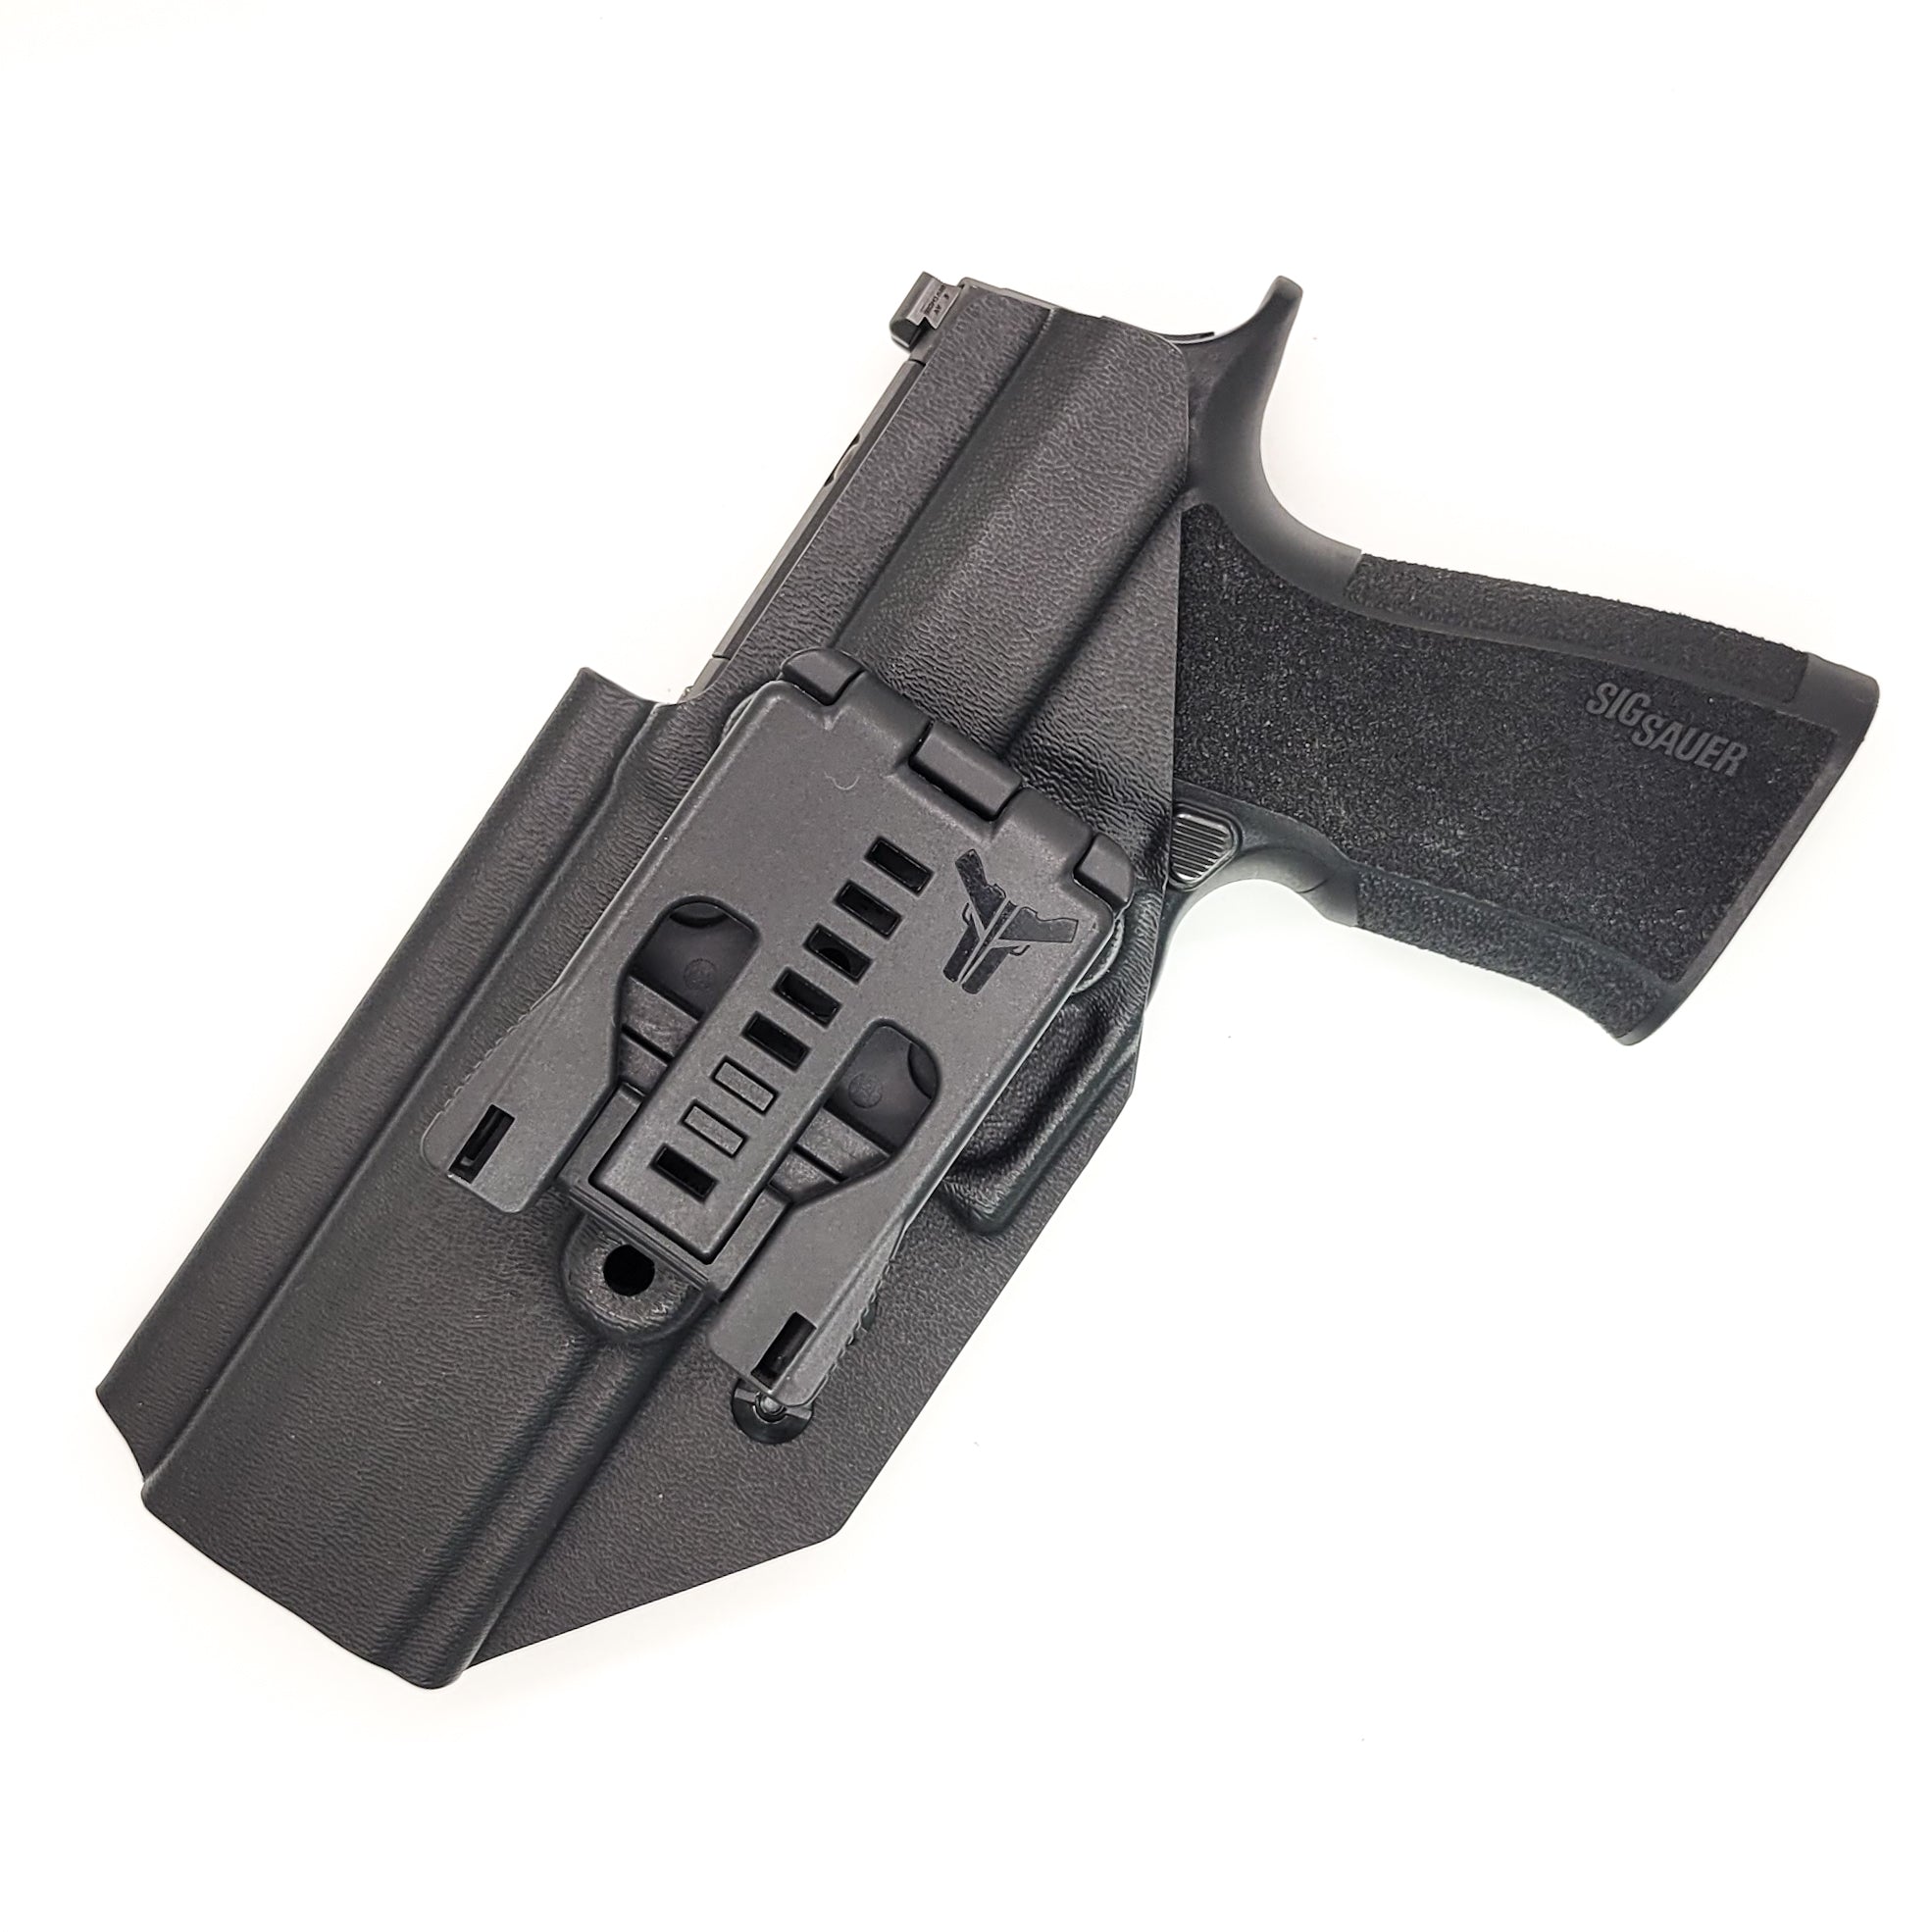 Outside Waistband OWB Kydex Taco Style Holster designed to fit the Sig Sauer 10MM with the Align Tactical Thumb Rest.  Full sweat guard, adjustable retention, open muzzle and profiled for a red dot sight. Proudly made in the USA for veterans and law enforcement. 10 MM P320-XTEN, P320 X Ten or P 320  XTEN.